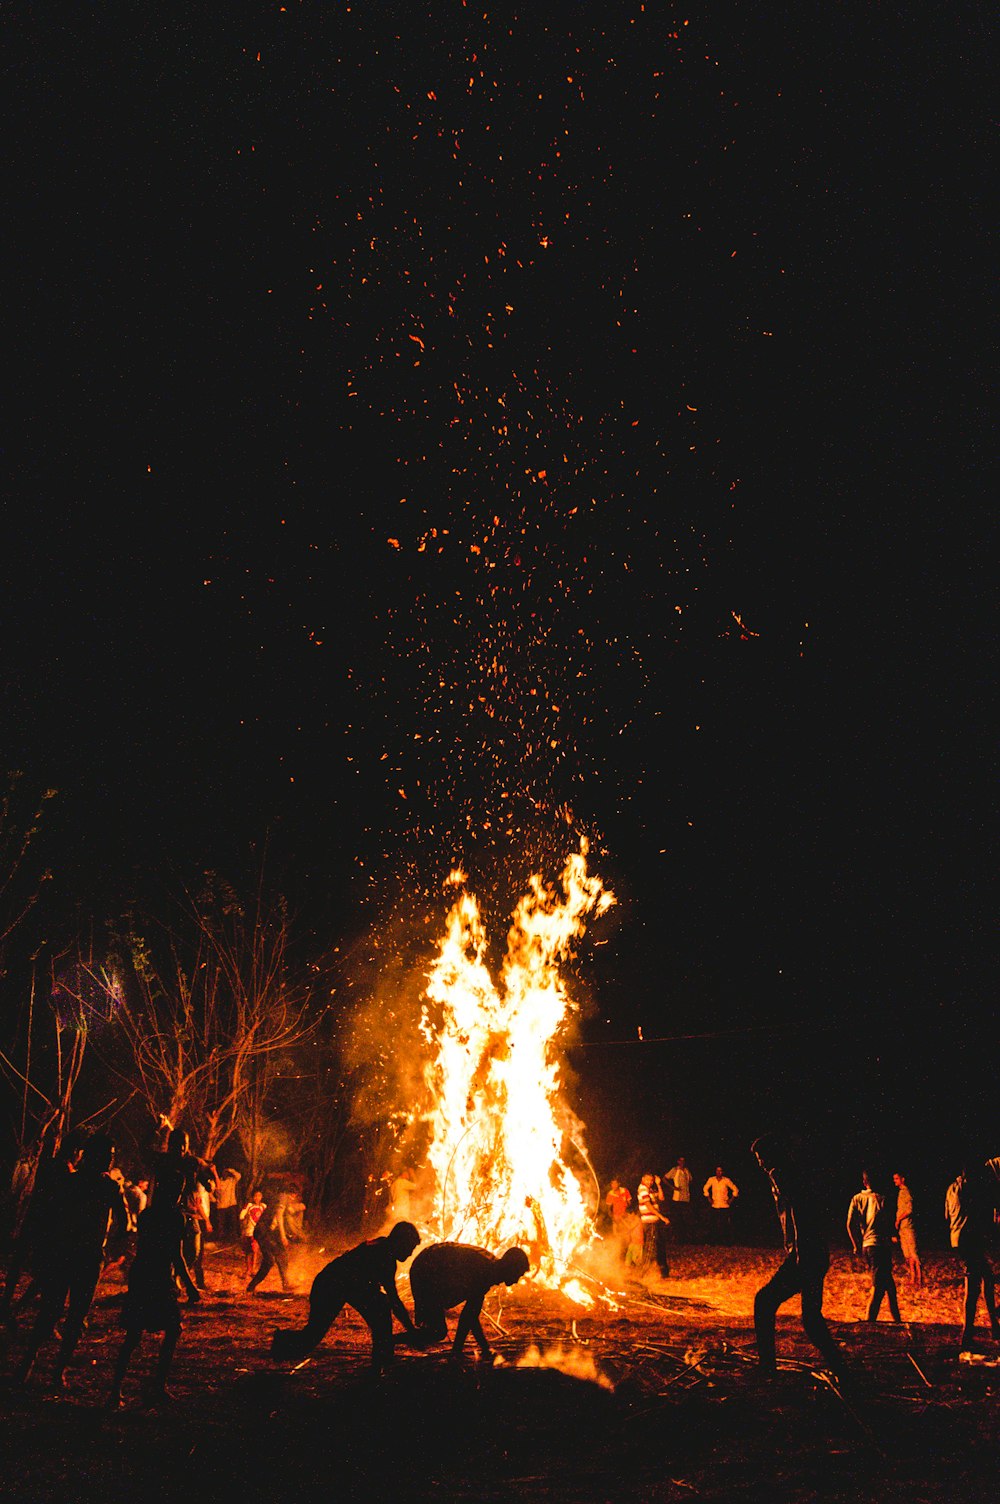 silhouette of people in front of lighted fire